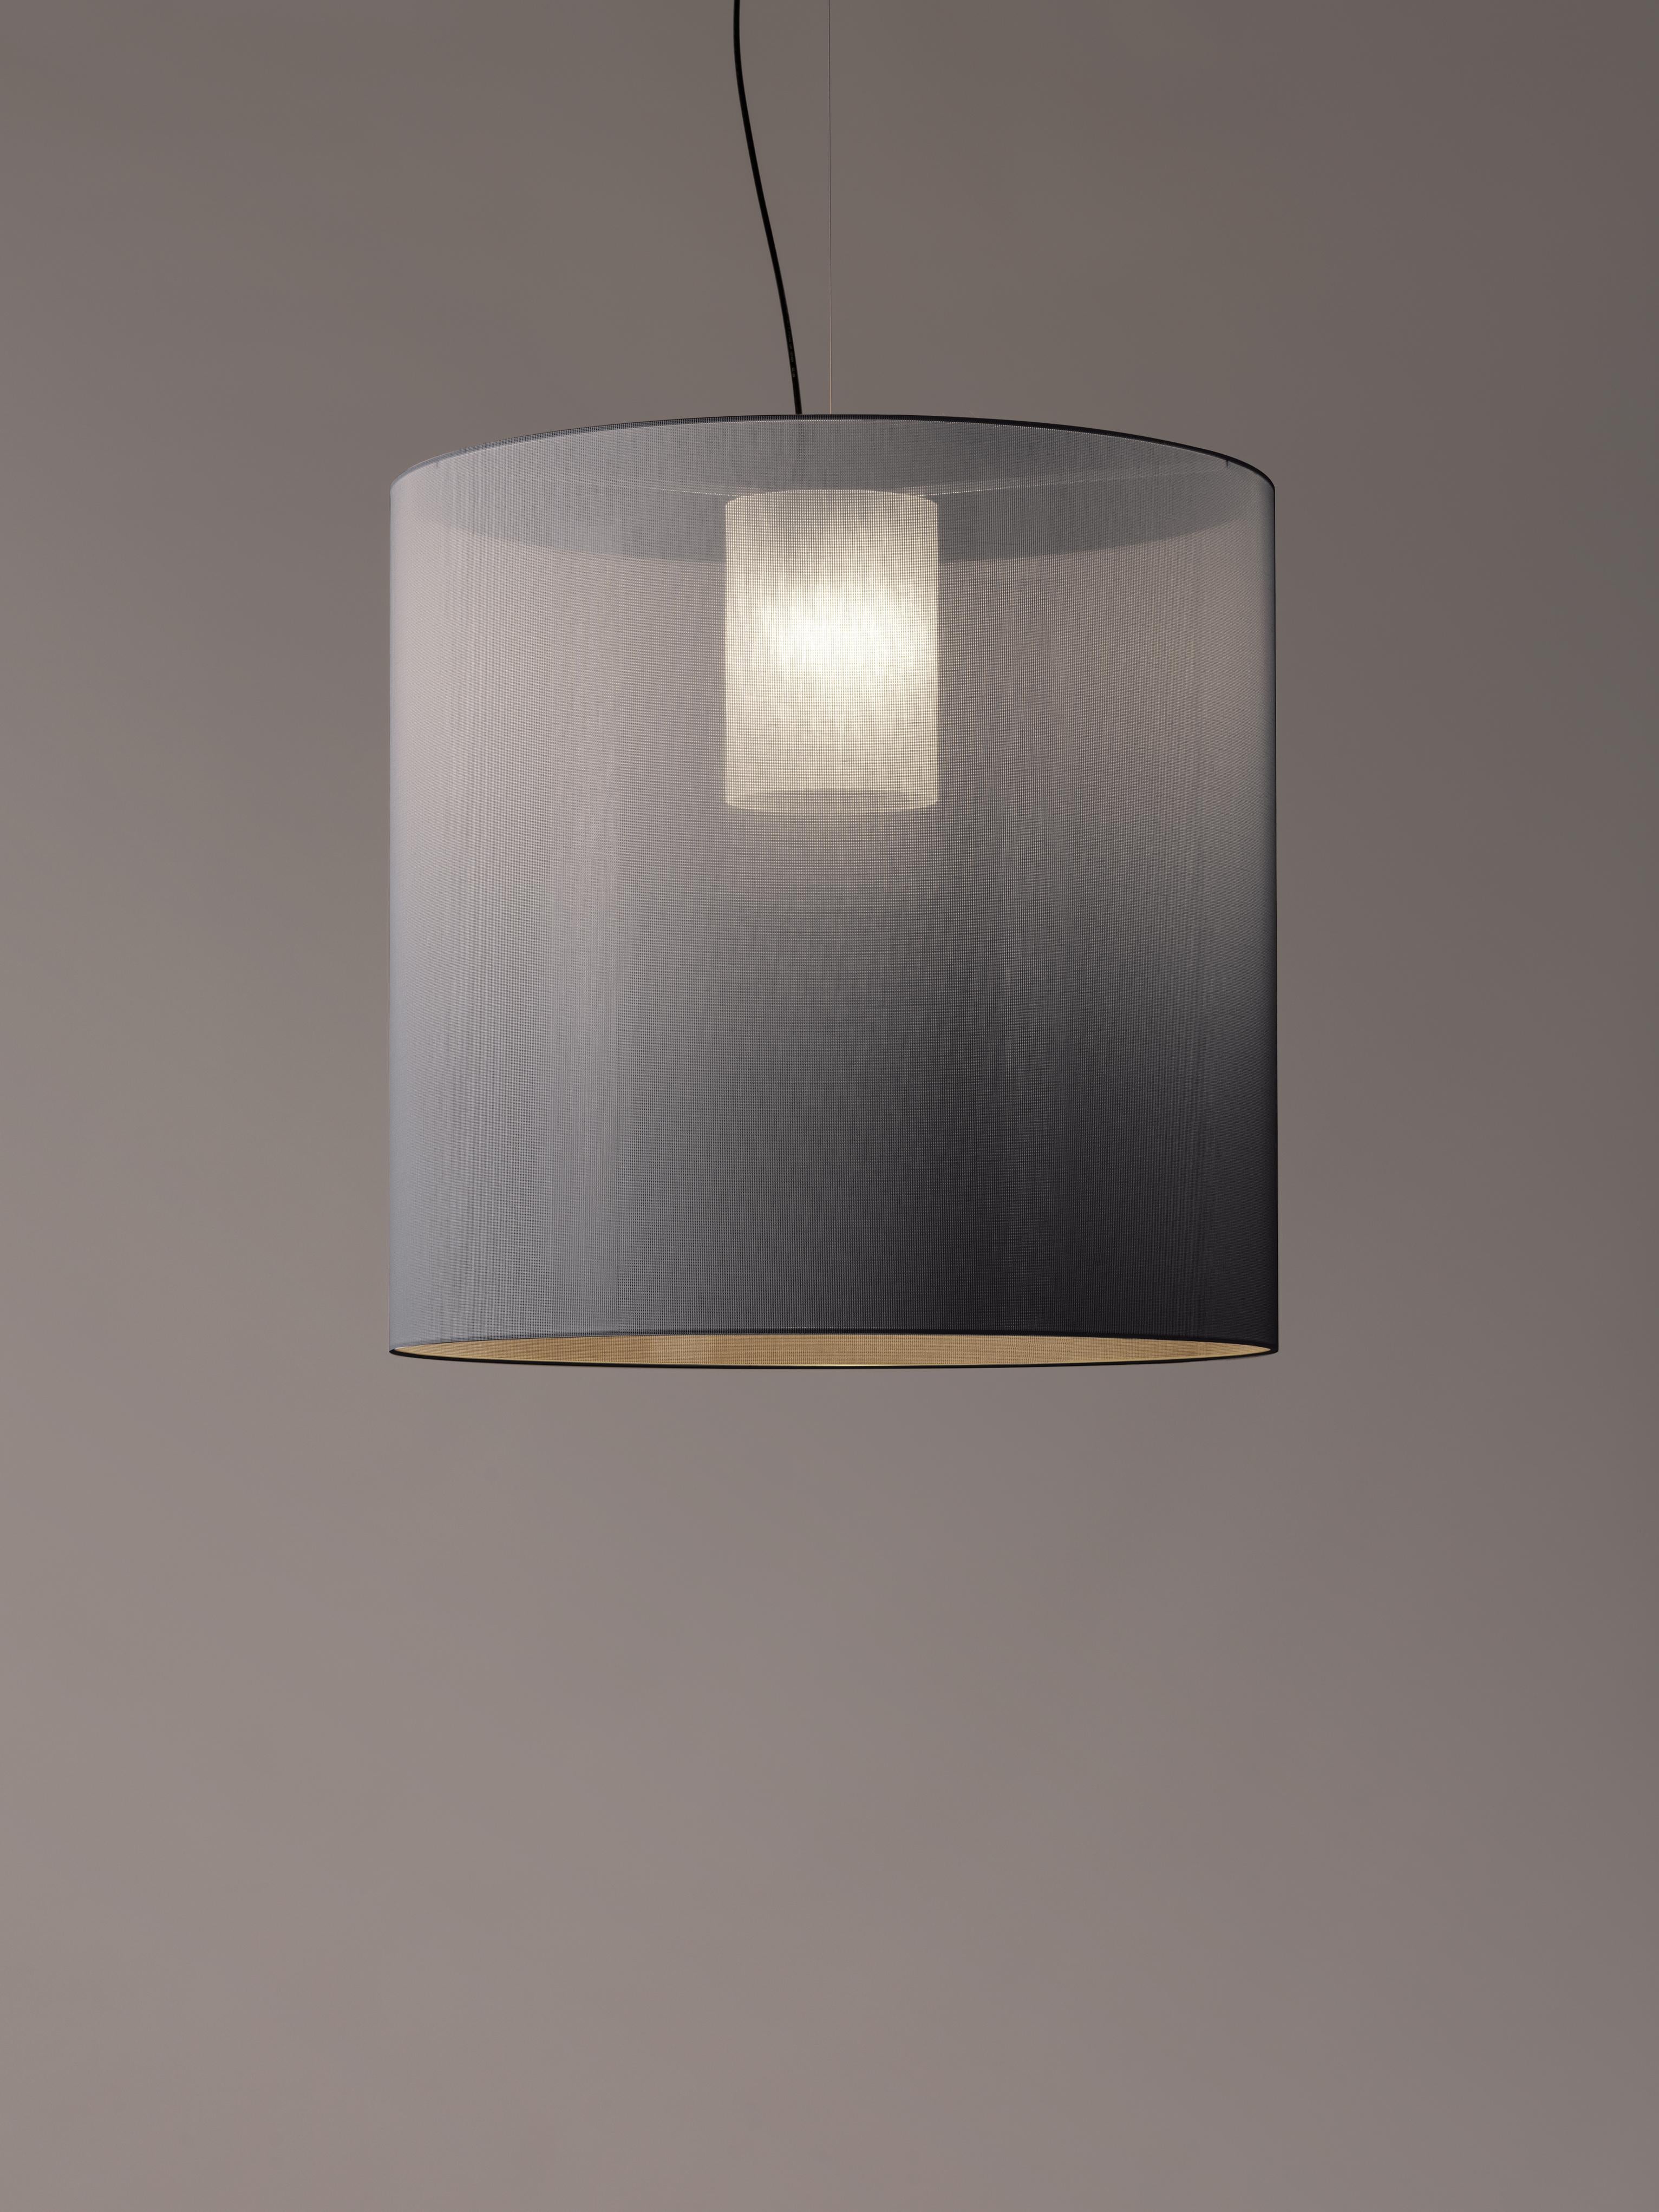 Grey moaré x pendant lamp by Antoni Arola
Dimensions: D 83 x H 81 cm
Materials: Metal, polyester.
Available in other colors and sizes.

Moaré’s multiple combinations of formats and colours make it highly versatile. The series takes its name